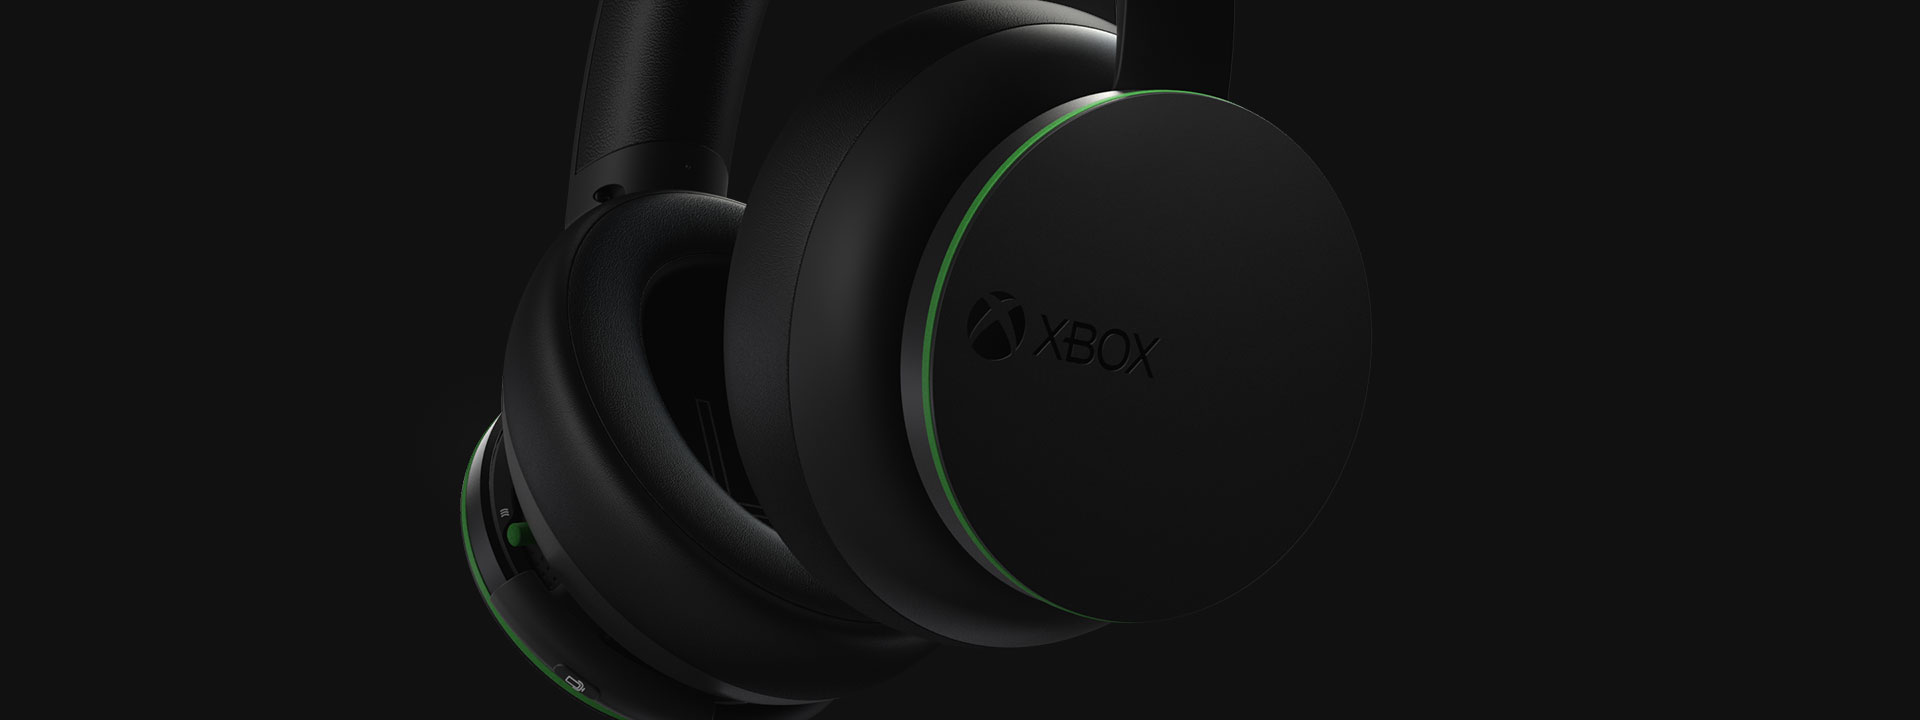 Ydmyghed Hellere For nylig Xbox Wireless Headset | Xbox